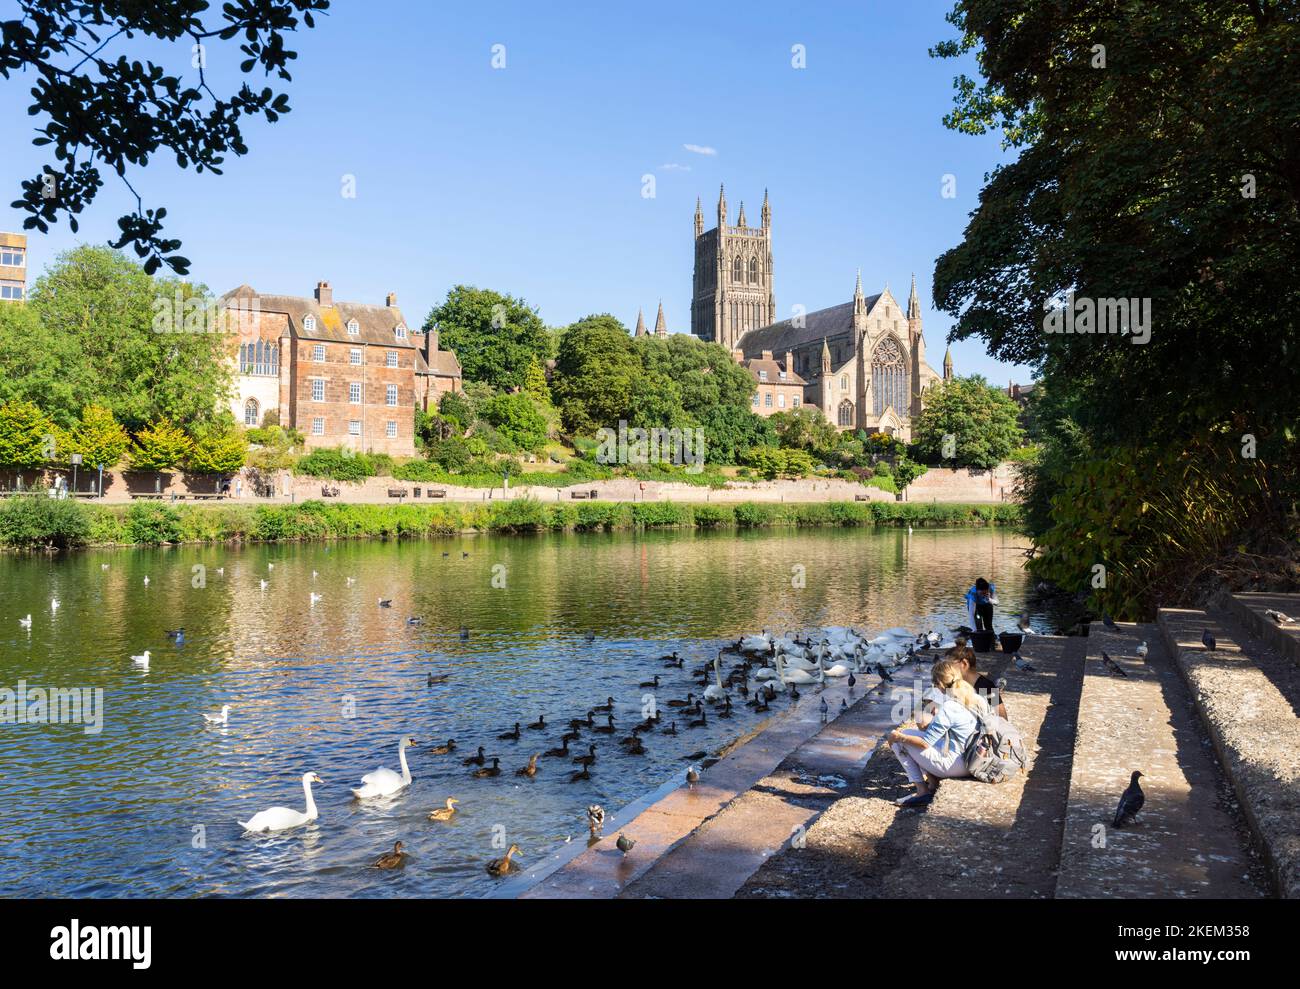 Worcester Swans on the River severn Worcester Cathedral River Severn Worcester Cathedral Worcester Worcester Worcester Worcestershire England UK GB Europe Banque D'Images